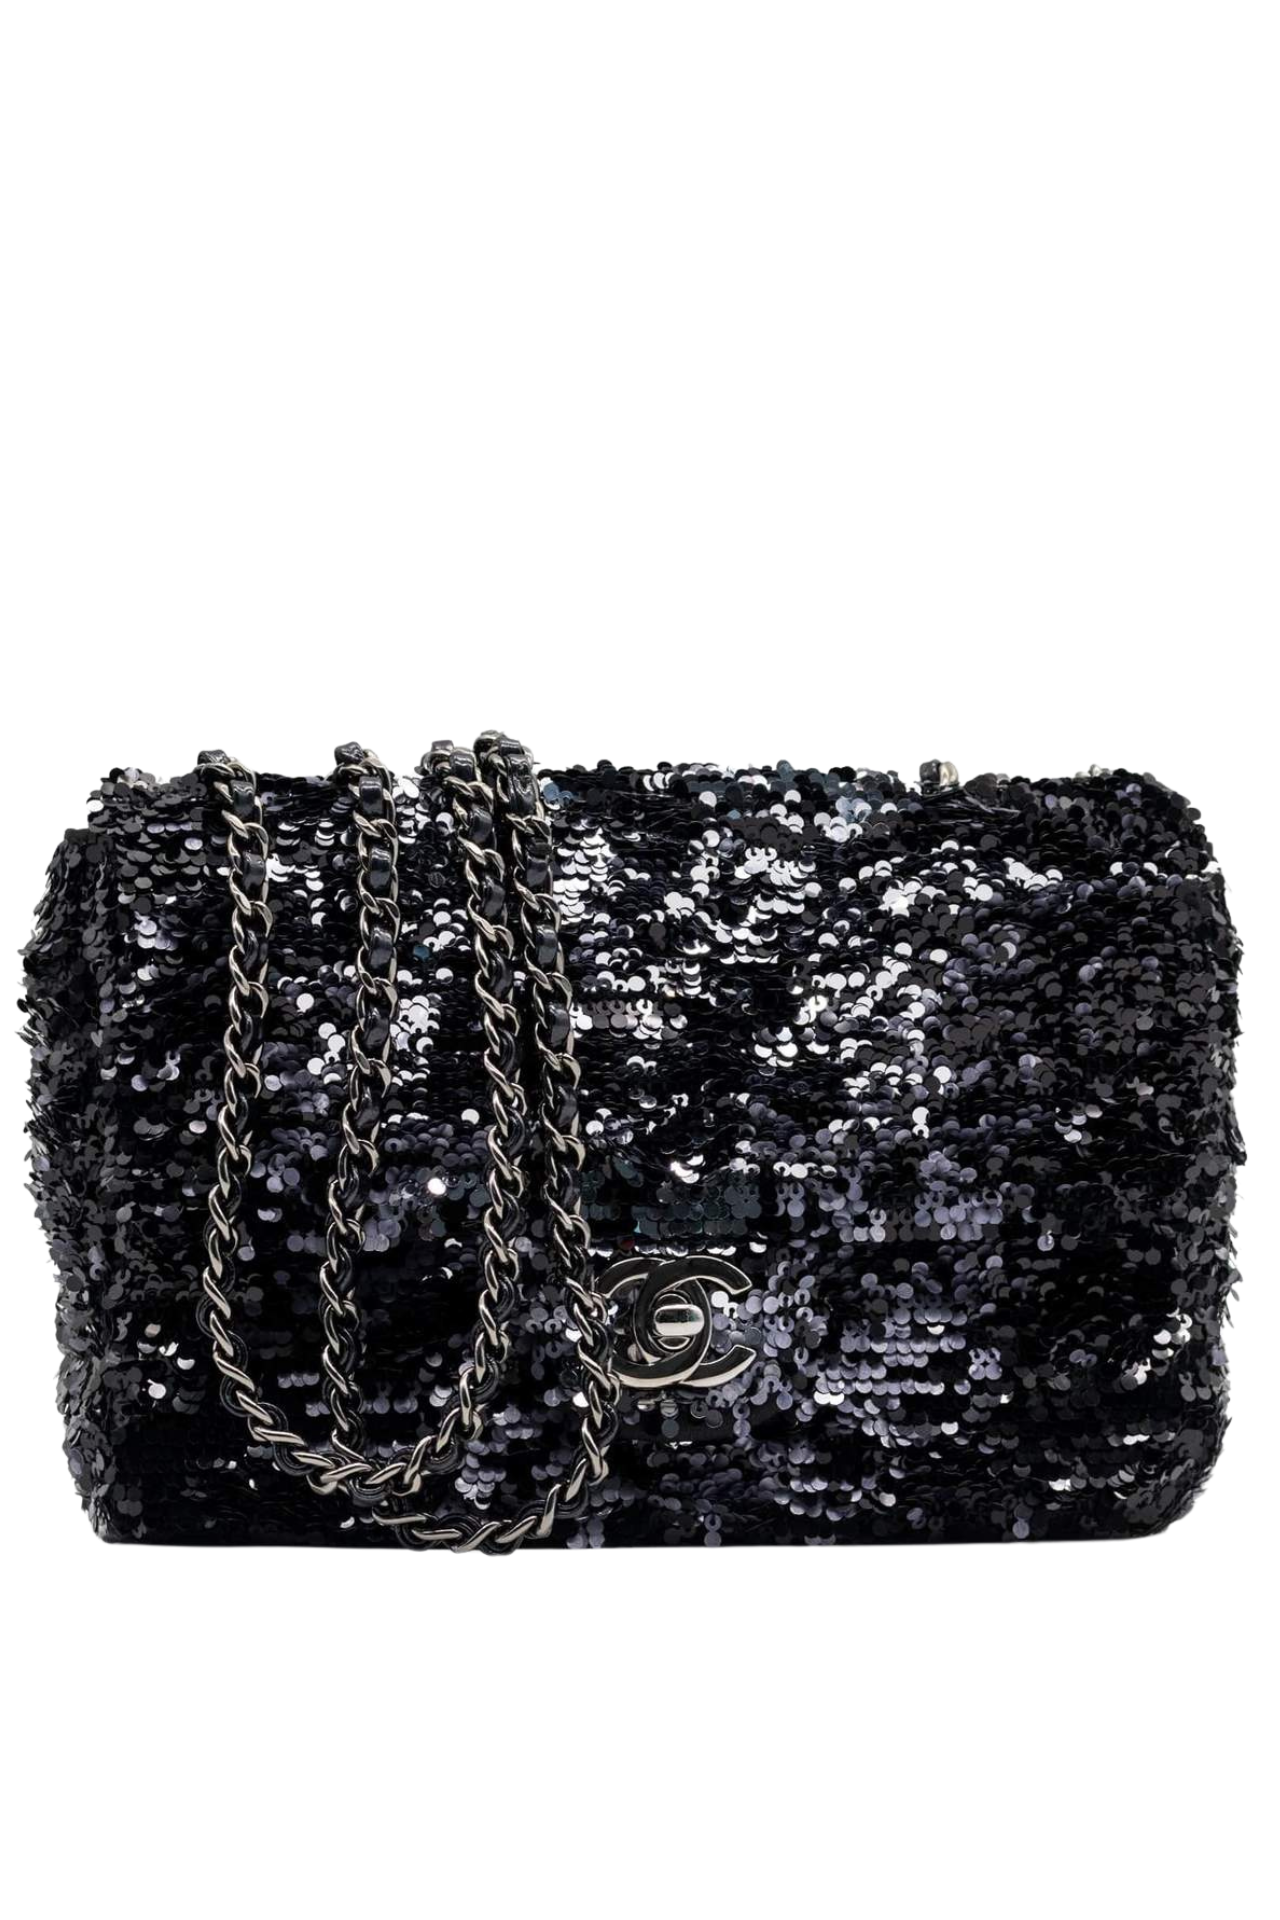 Chanel Sequin Classic Small Flap